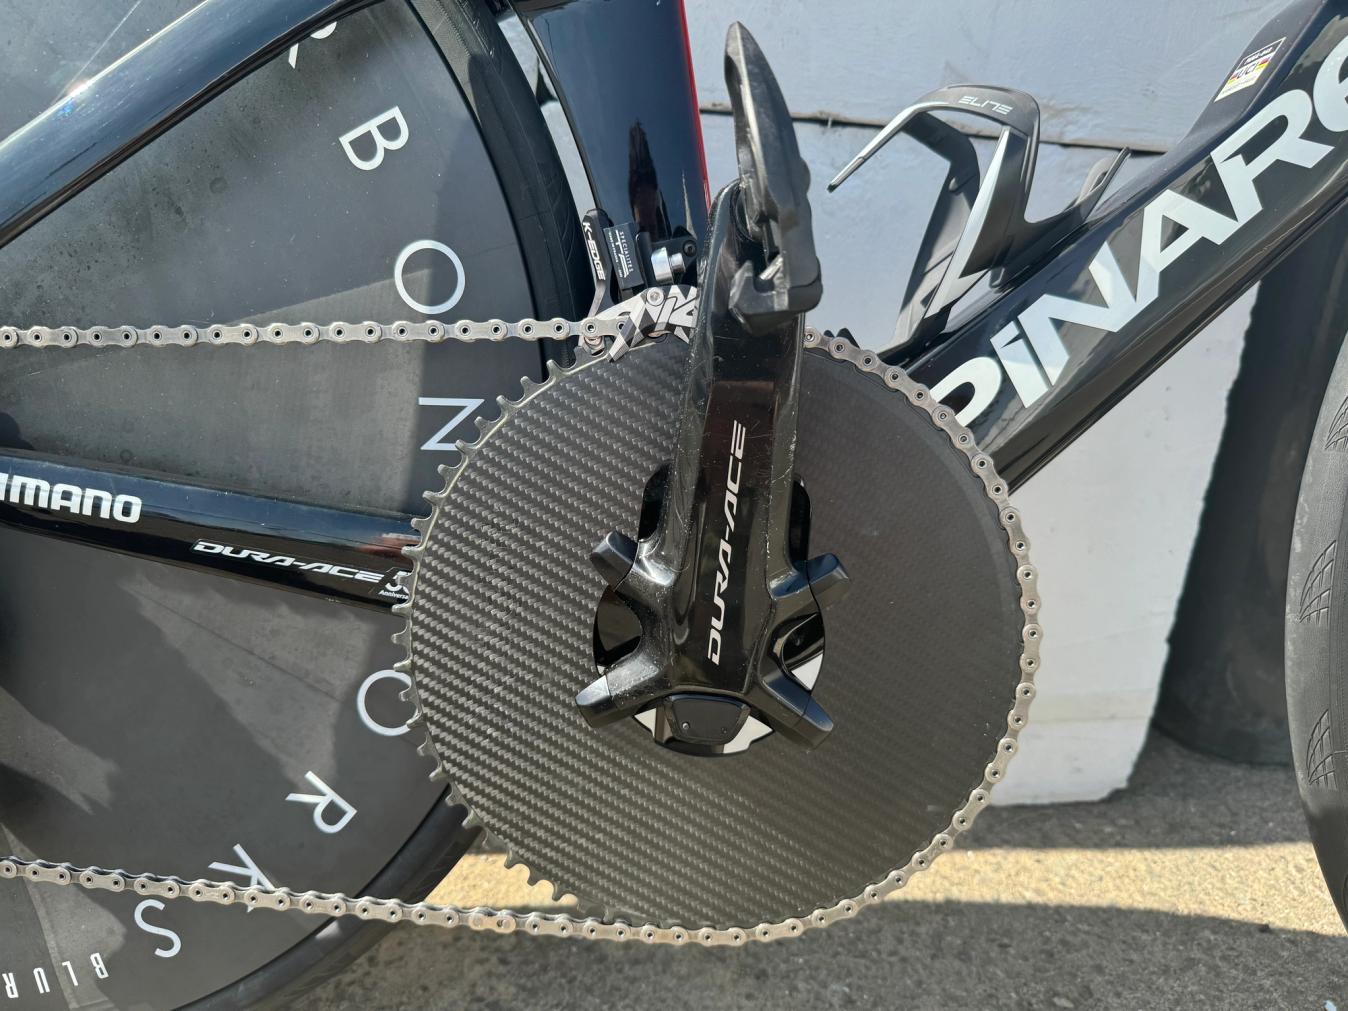 His Ineos Grenadiers teammate Ben Swift used a slightly smaller 66t set-up. They were made possible by Digirit chainrings, except these weren’t designed for the road or time trialling, but for the track